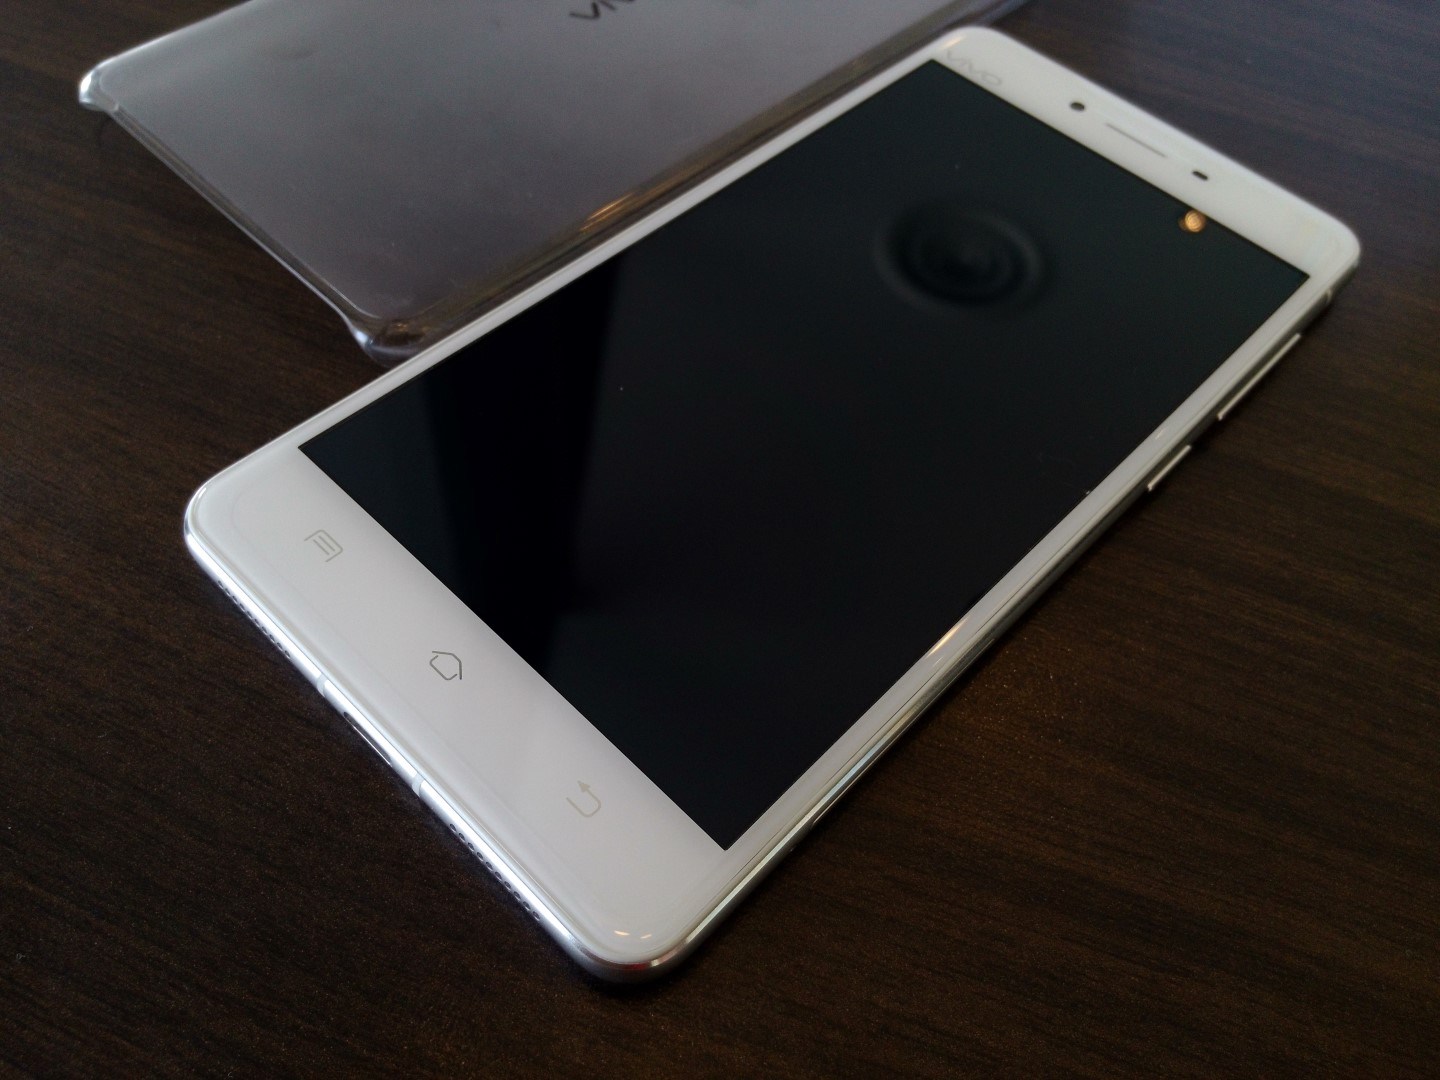 Vivo X5pro Review Selfie Phone - Iphone7 文鎮 化 , HD Wallpaper & Backgrounds